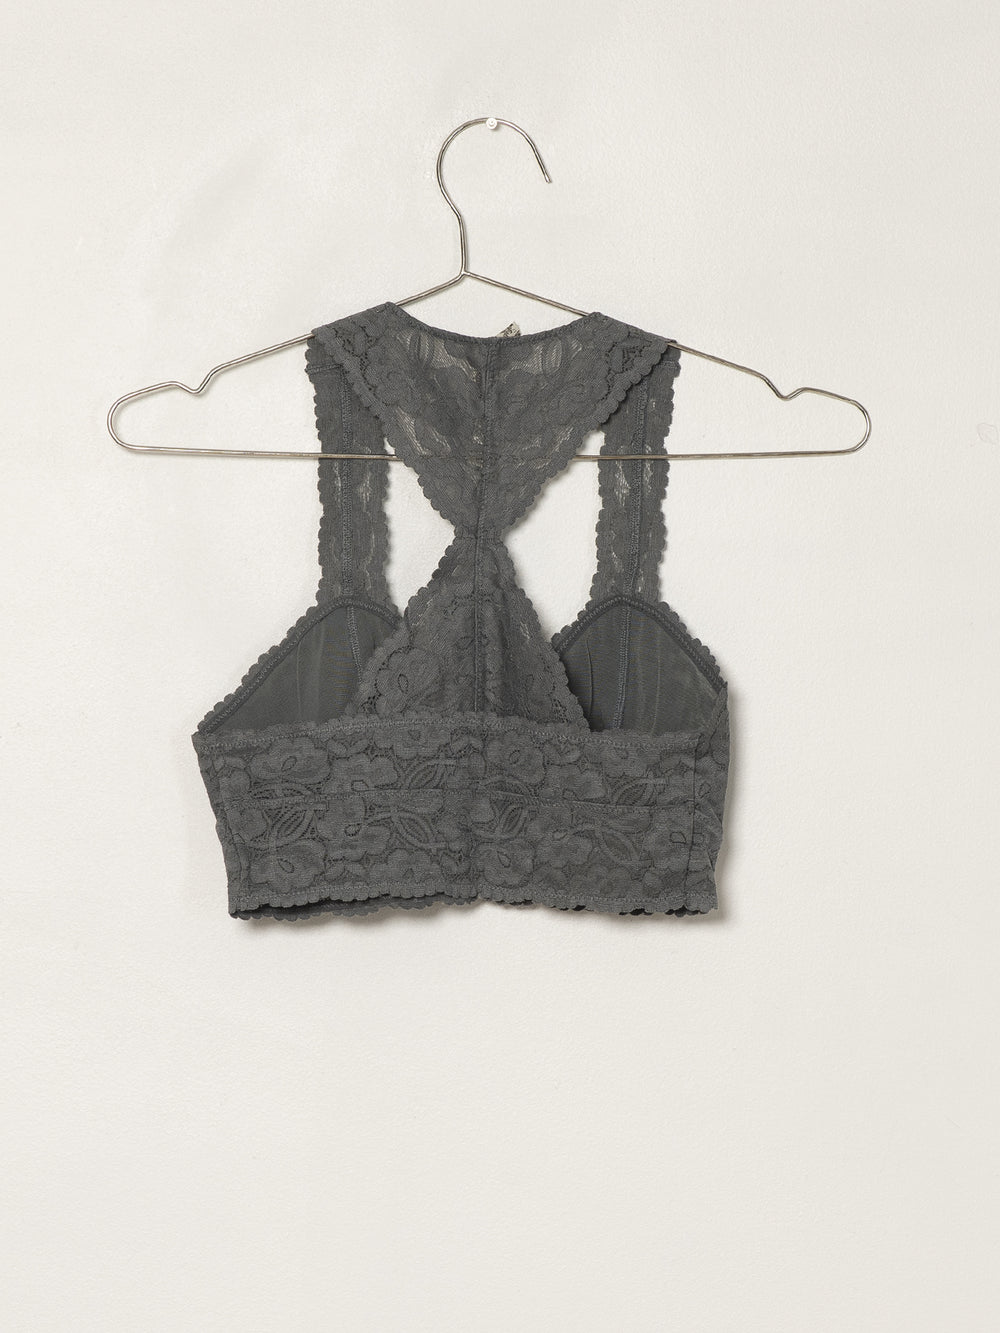 FREE PEOPLE GALLOON LACE RACERBACK - GRAPHITE - DÉSTOCKAGE